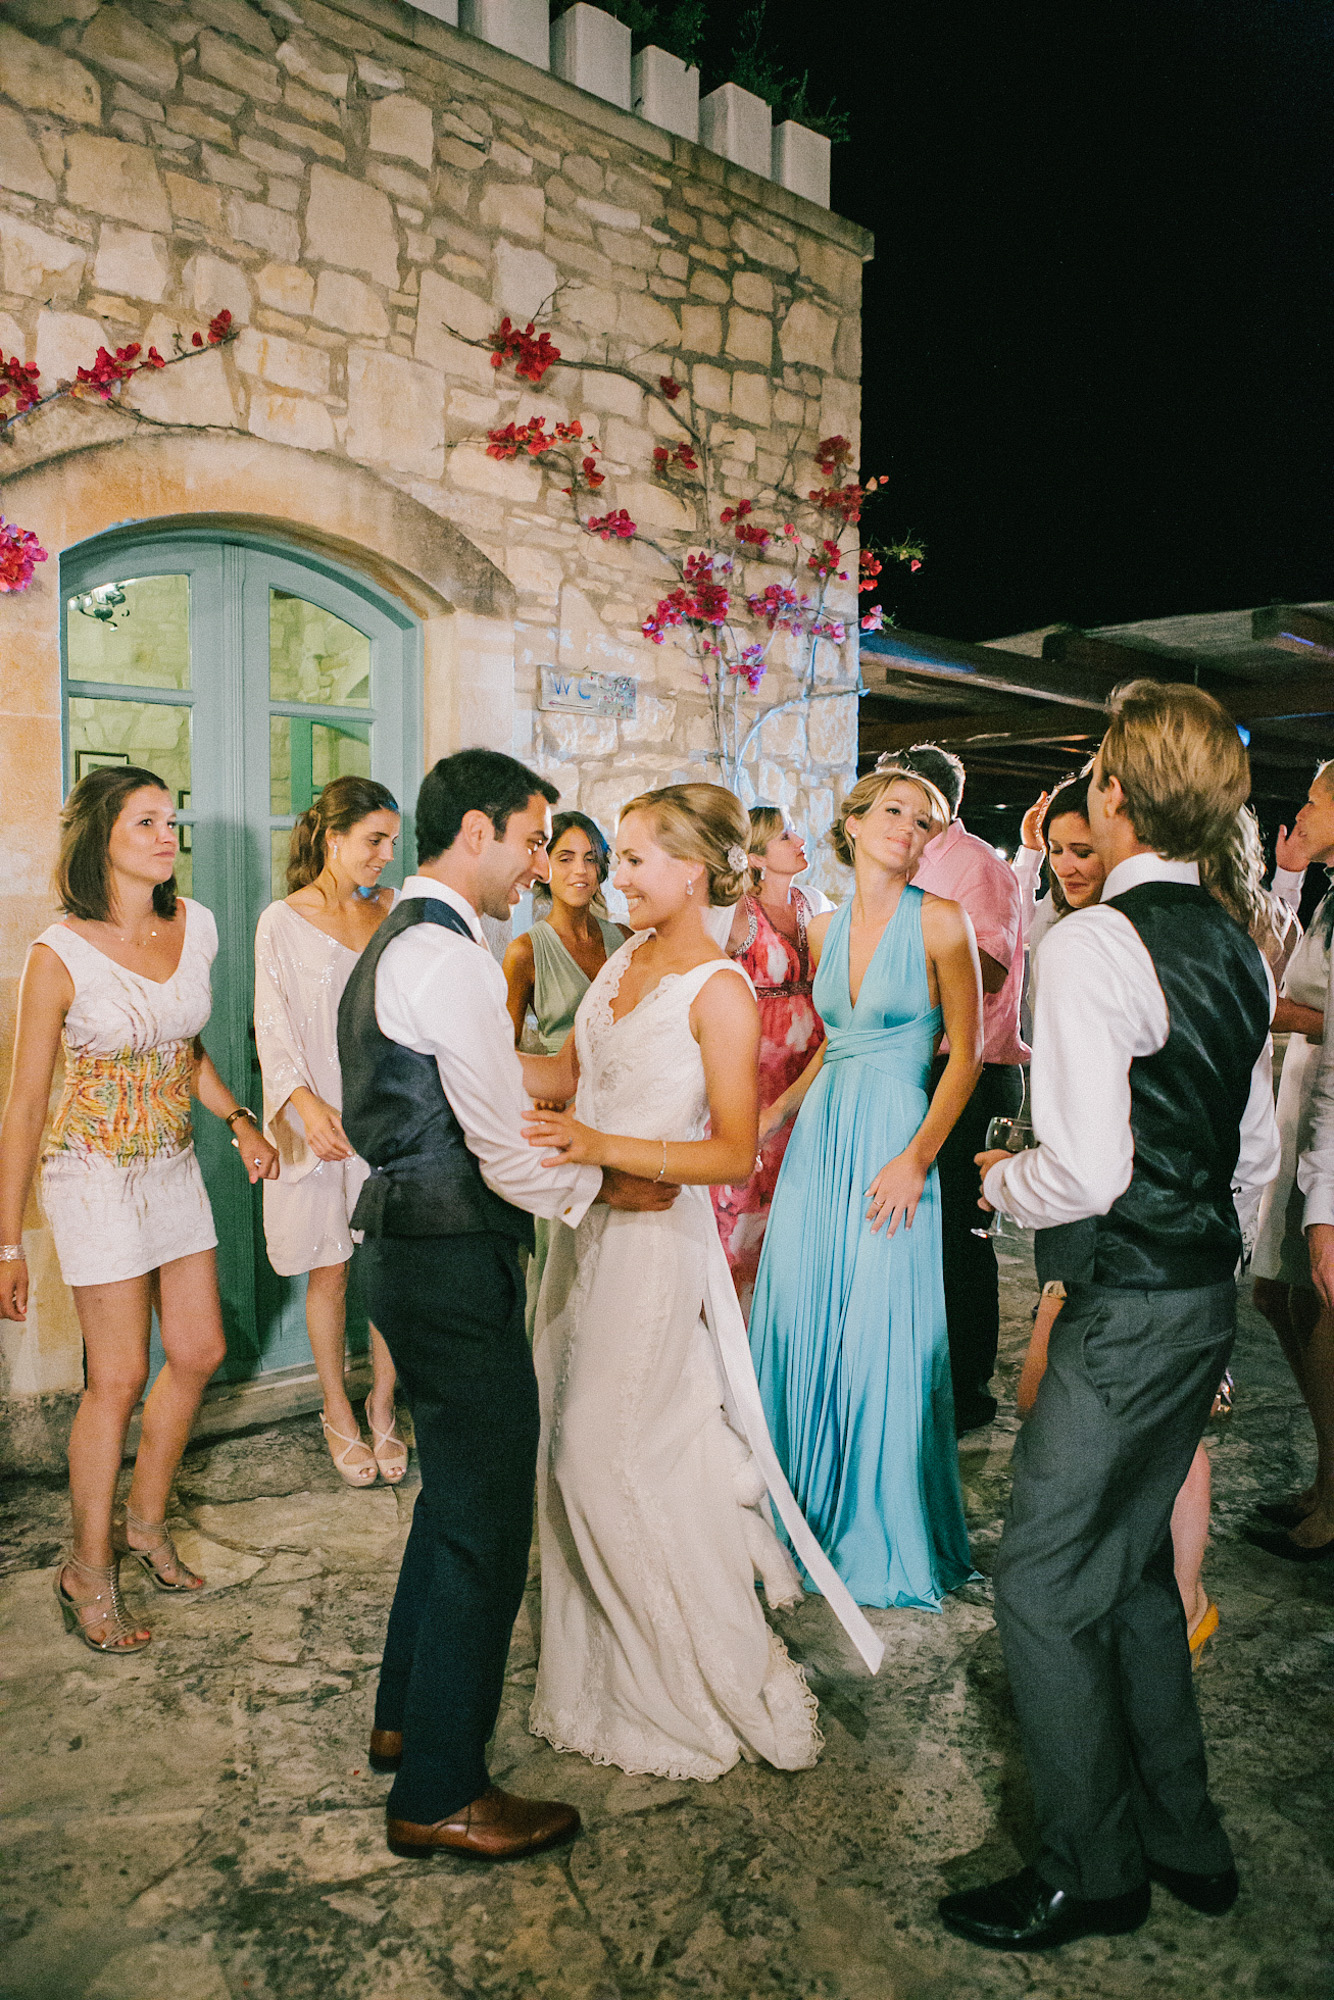 Bride and groom dancing together during their wedding reception in Agreco farm estate in Crete.